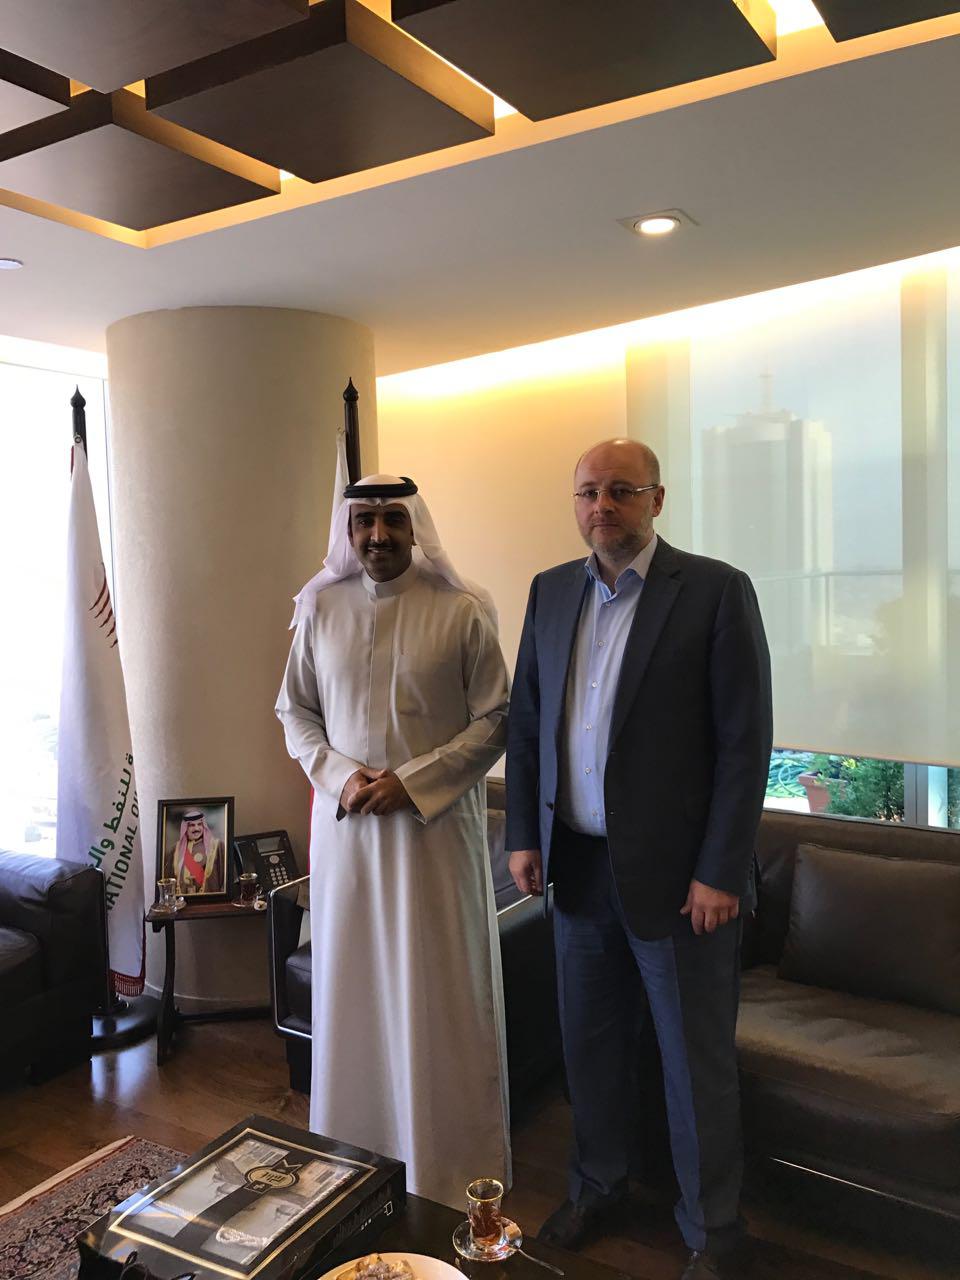 Meeting between the founder of NNIAT Ruslan Tokaev and the Minister of Oil His Excellency Sheikh Mohammed bin Khalifa Al Khalif